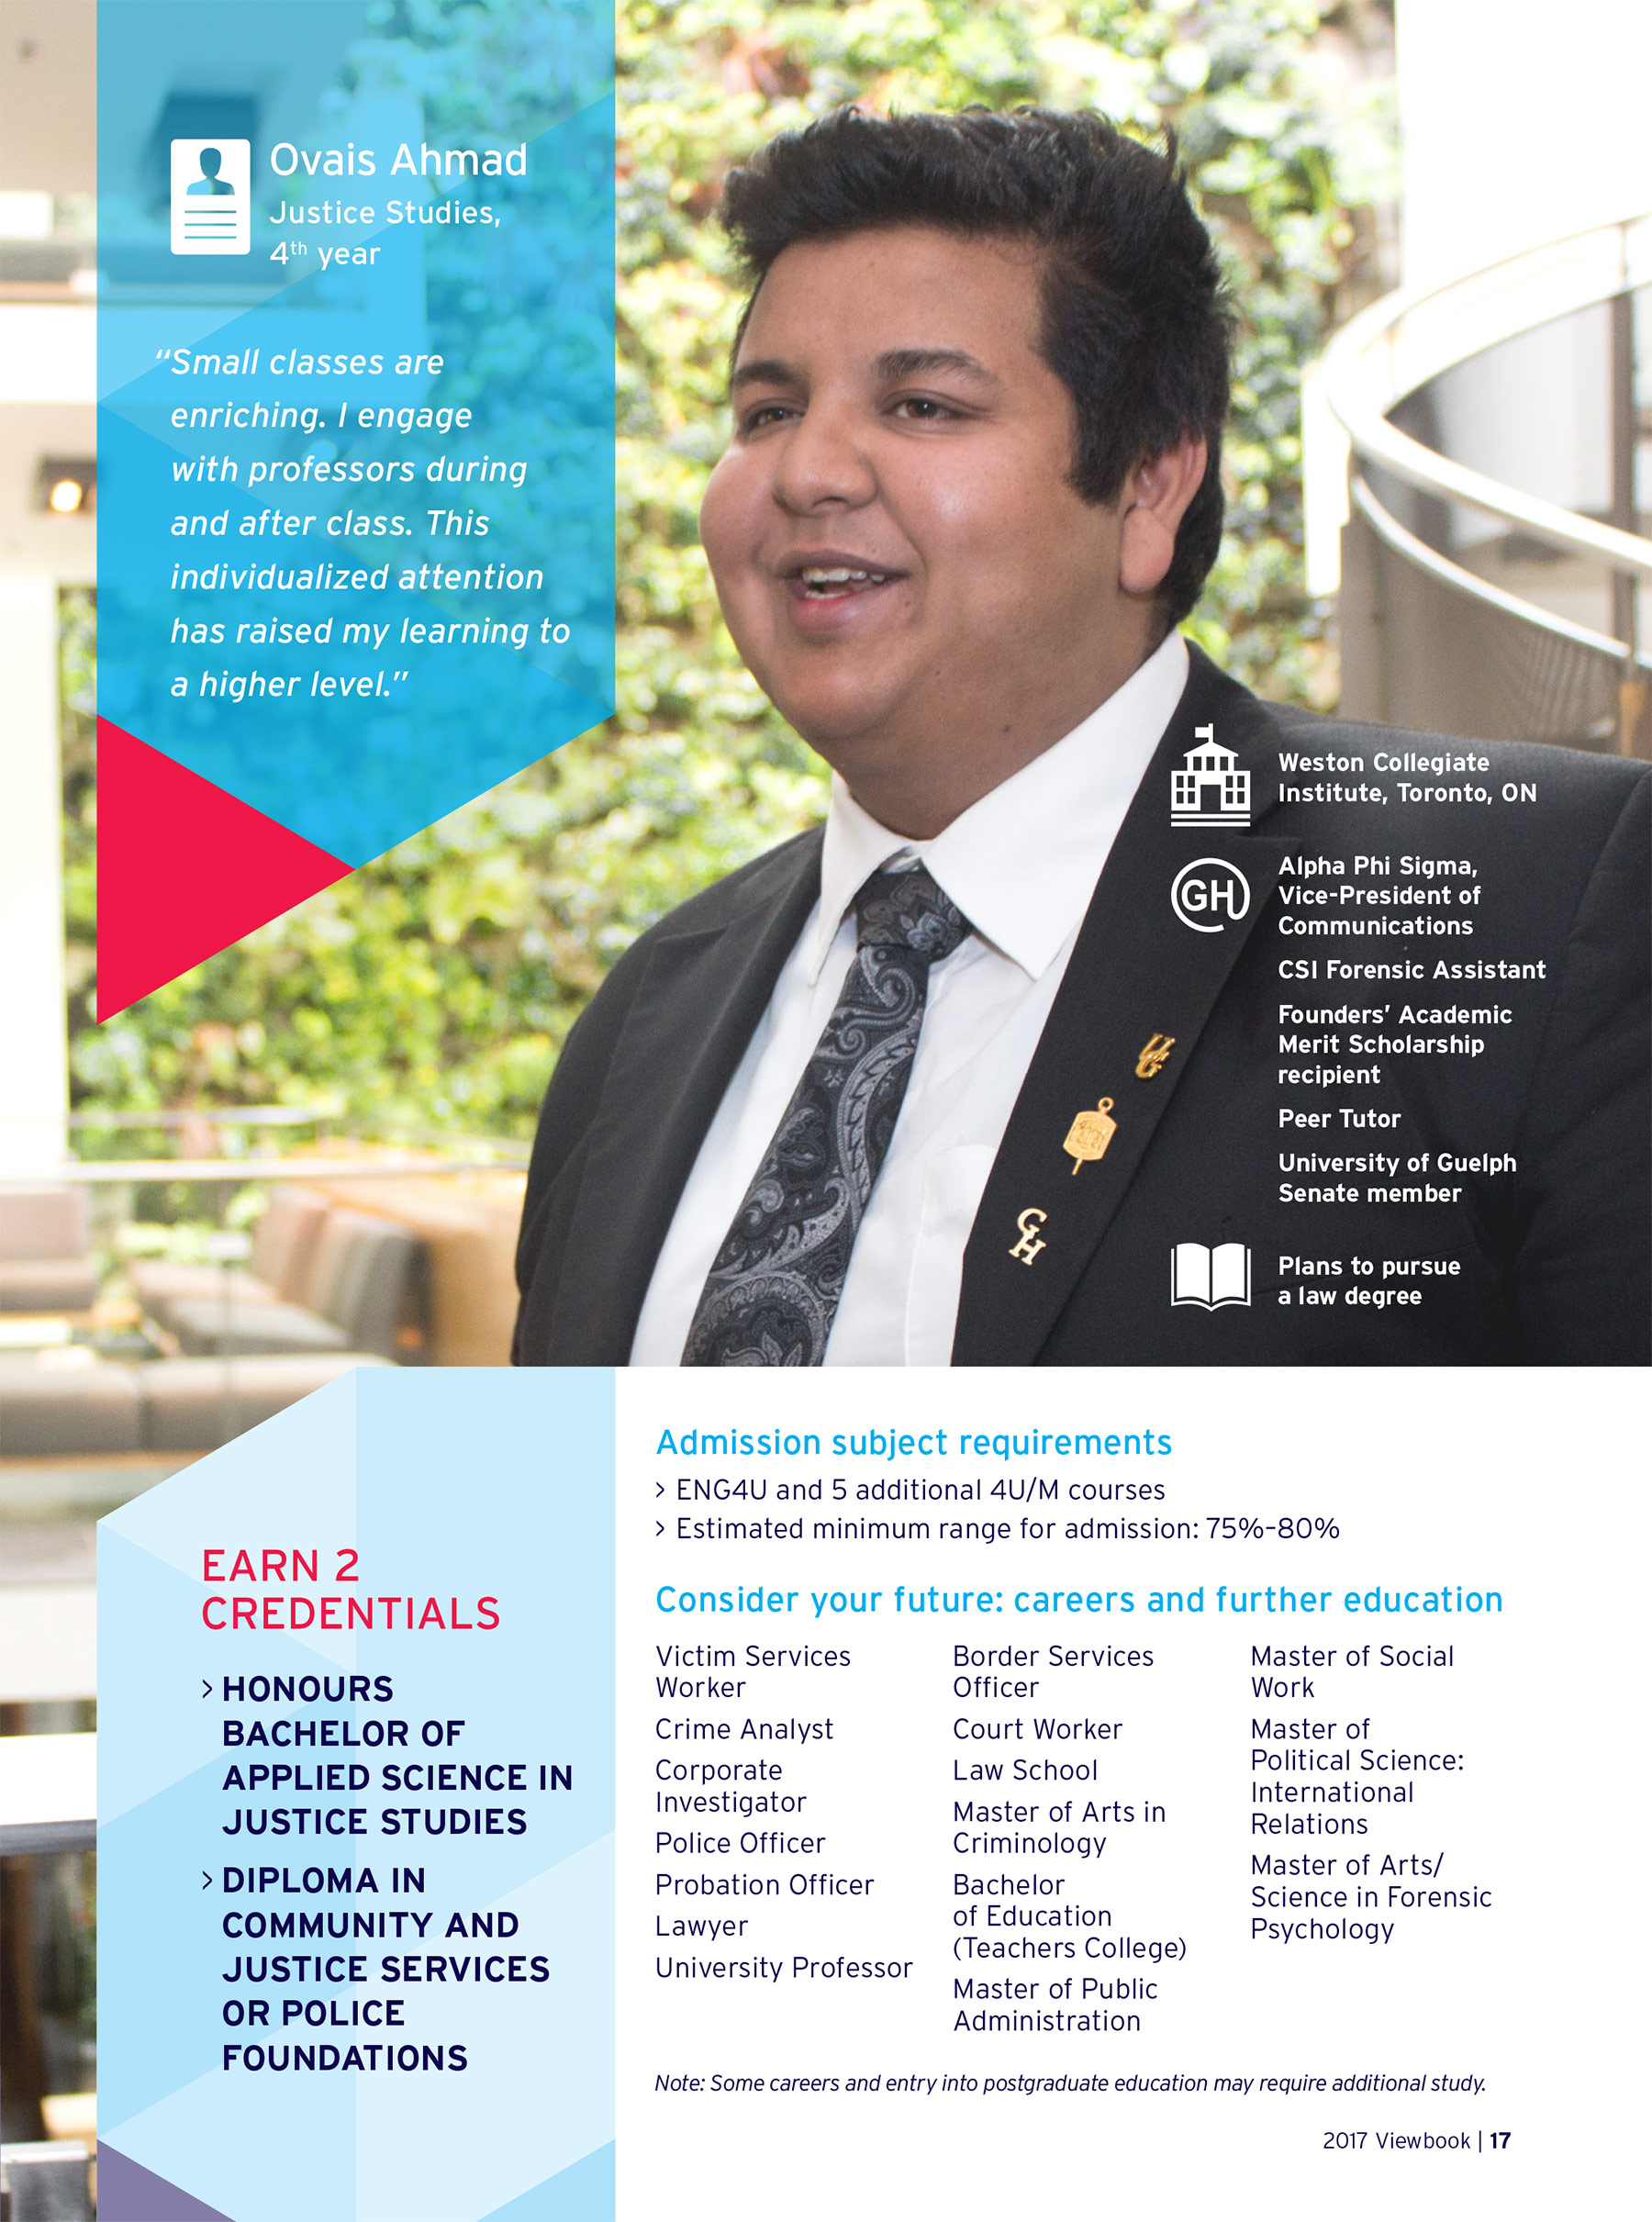 Profile of Ovais in 2017 UofGH Viewbook